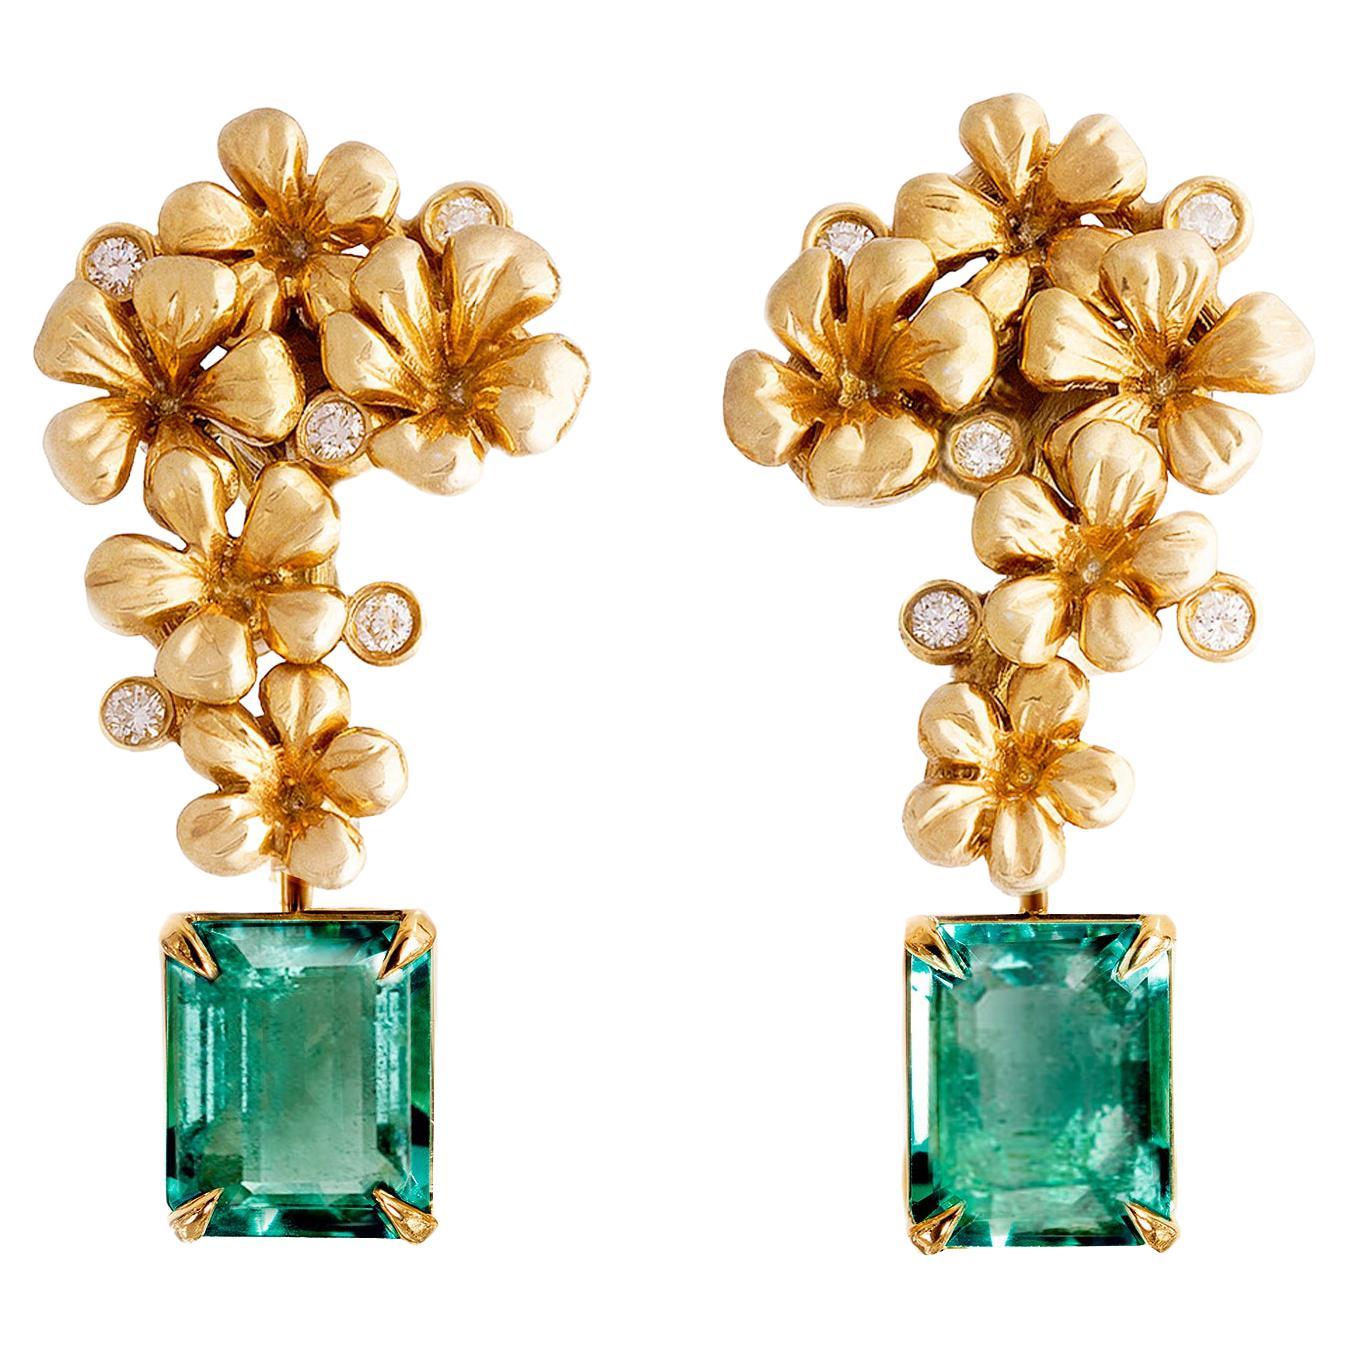 Modern Style Eighteen Karat Yellow Gold Clip-on Earrings with Natural Emeralds